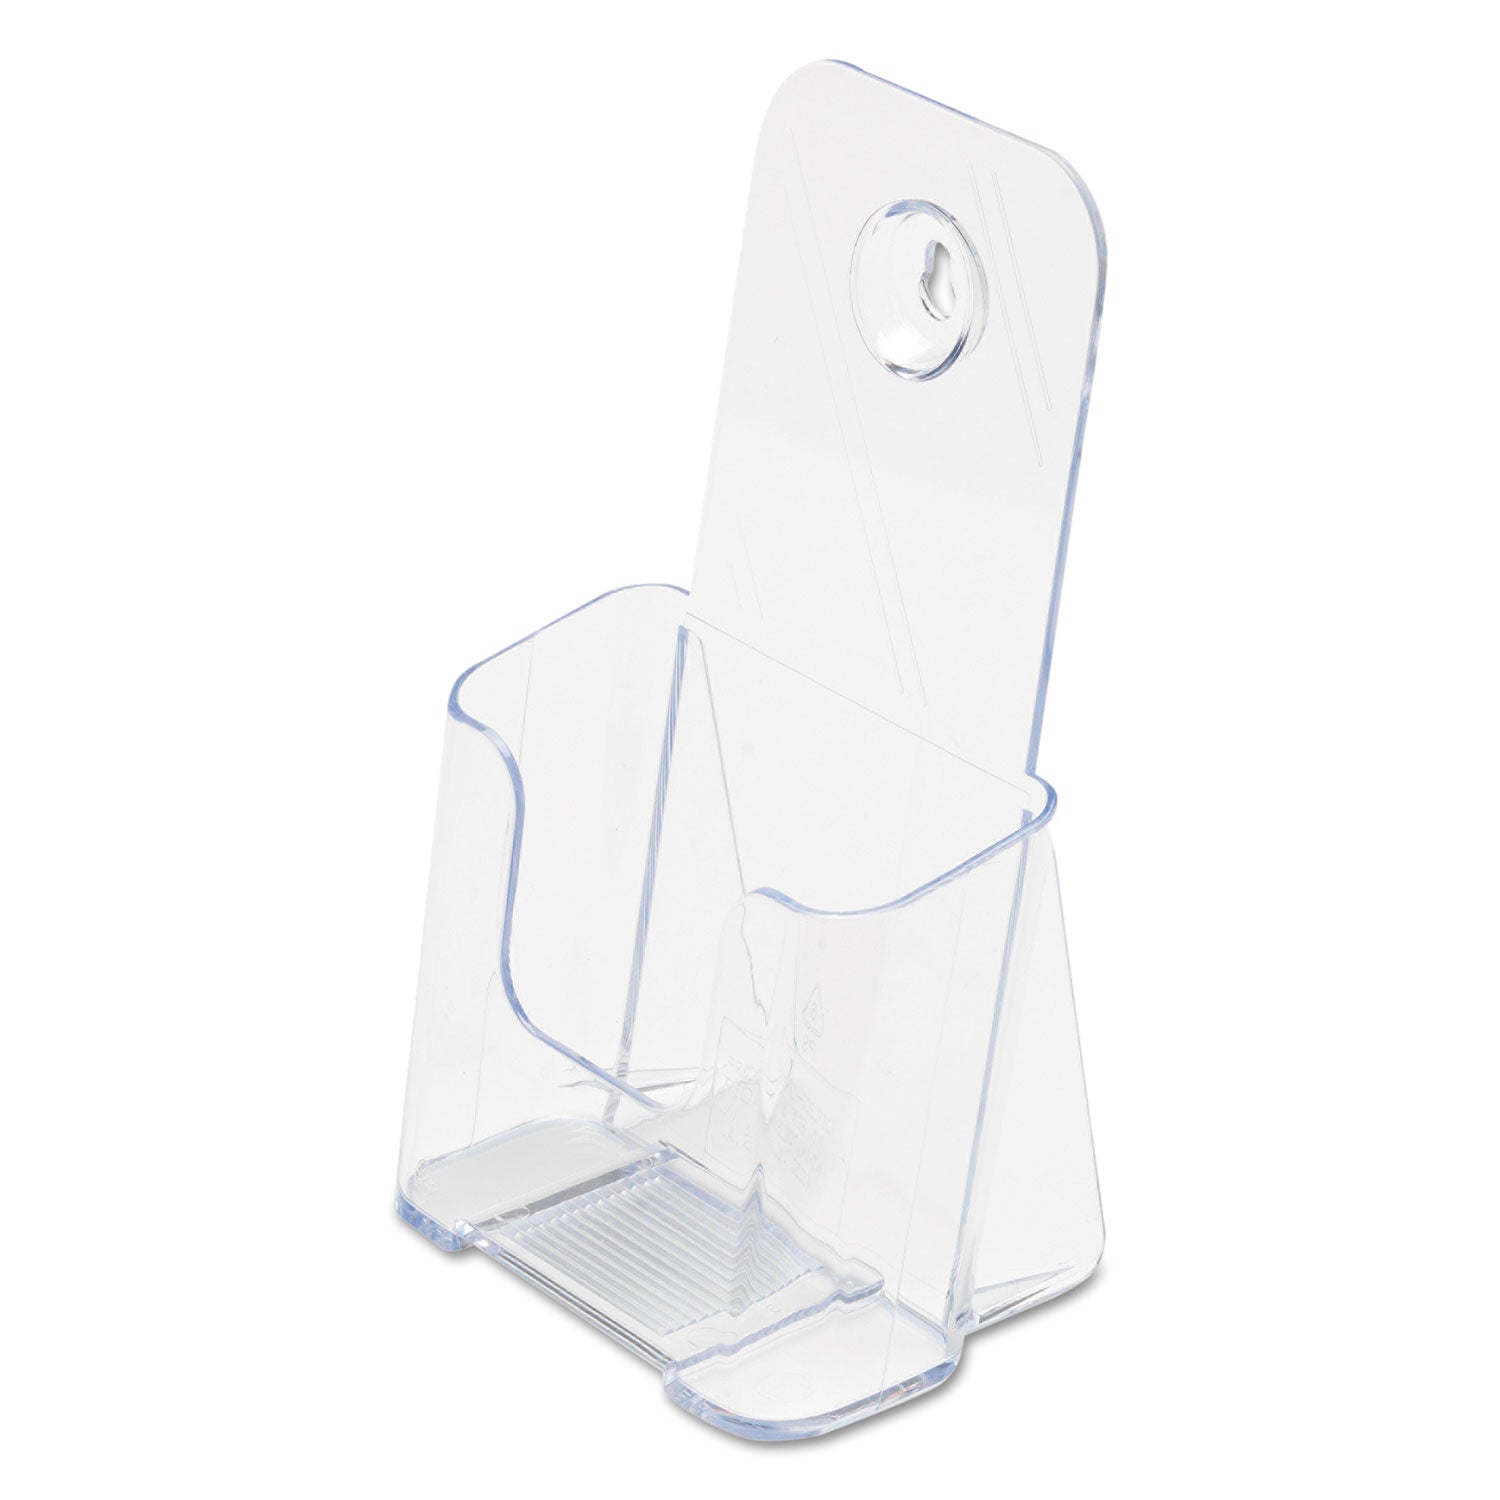 DocuHolder for Countertop/Wall-Mount, Leaflet Size, 4.25w x 3.25d x 7.75h, Clear - 